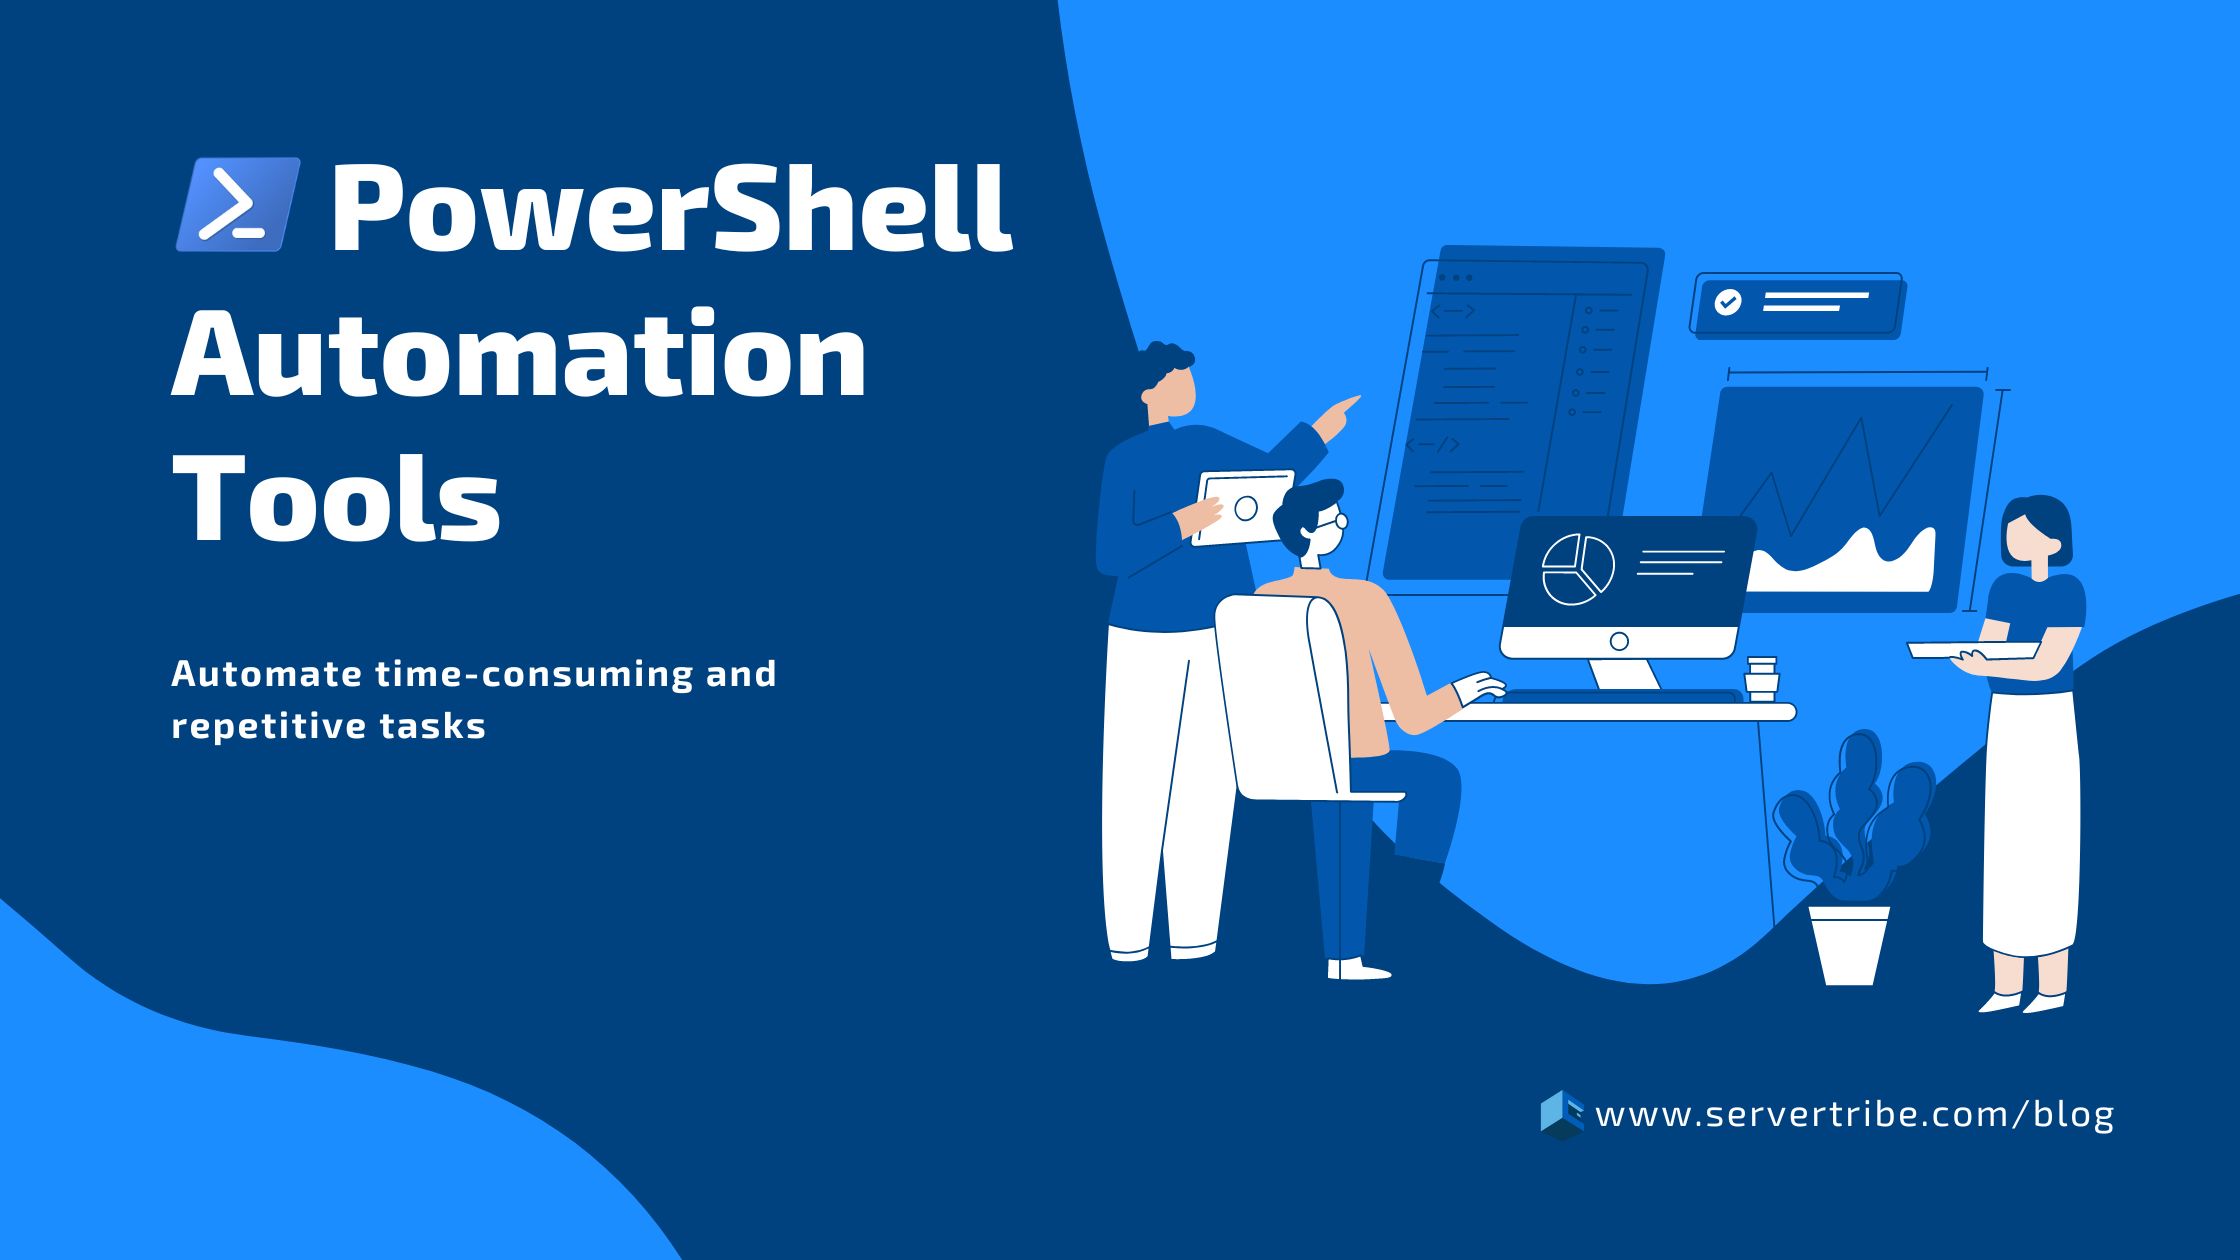 PowerShell Automation Tools